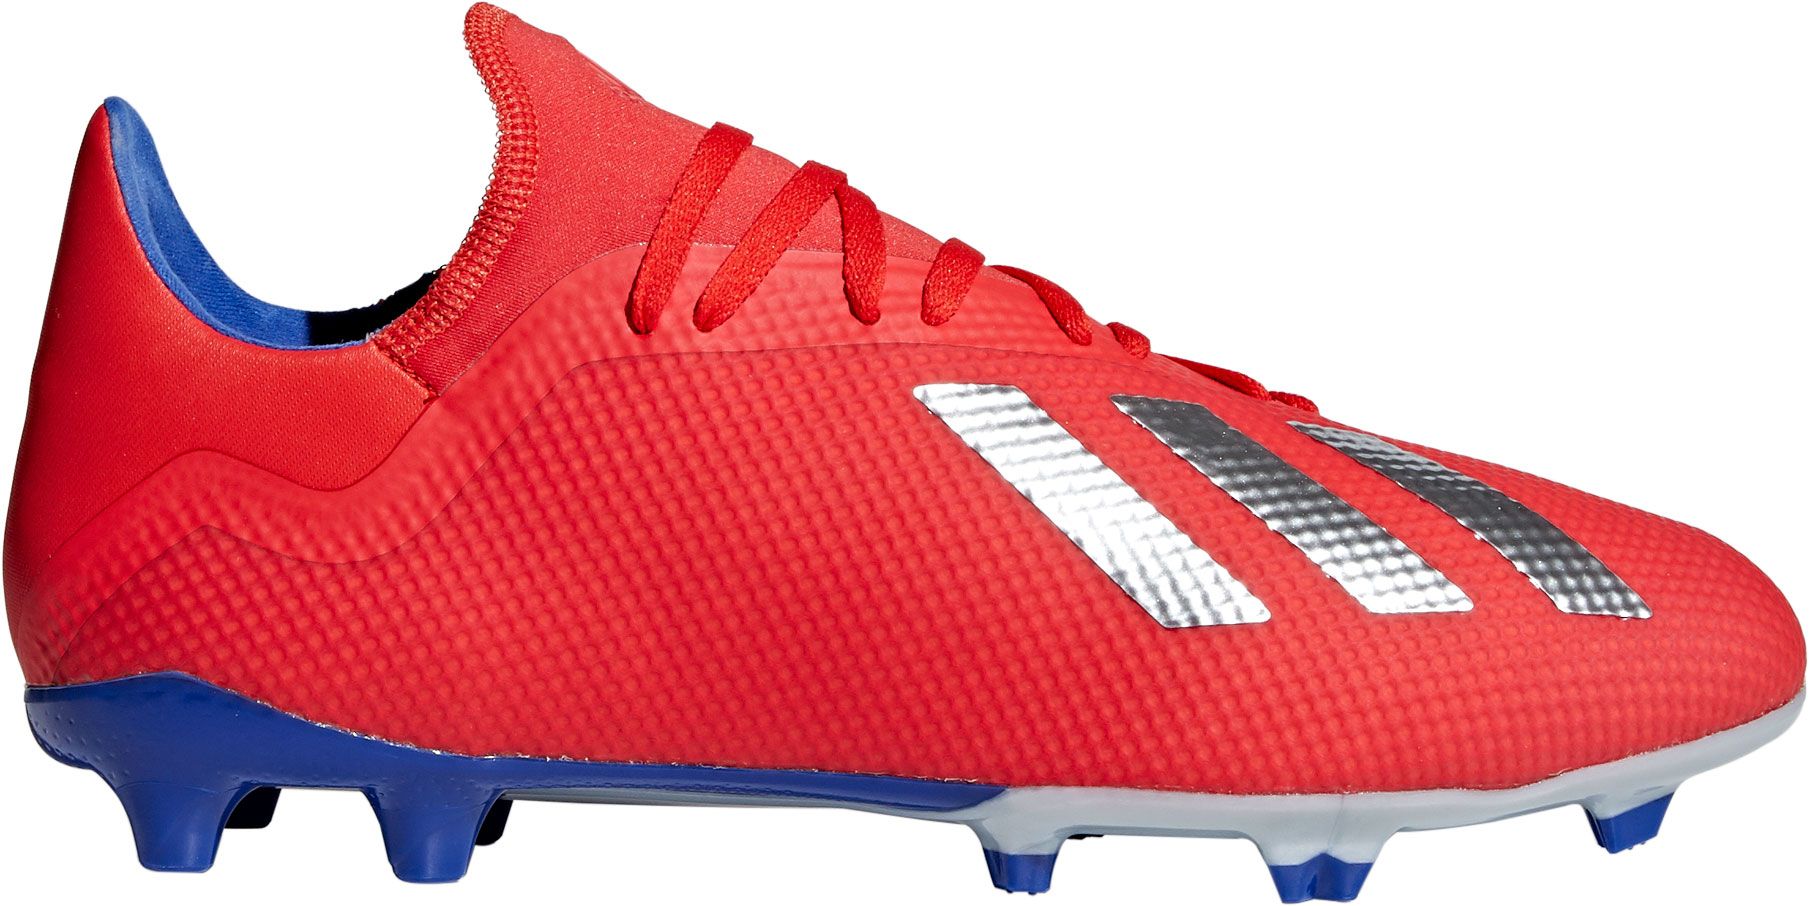 adidas soccer cleats 18.3